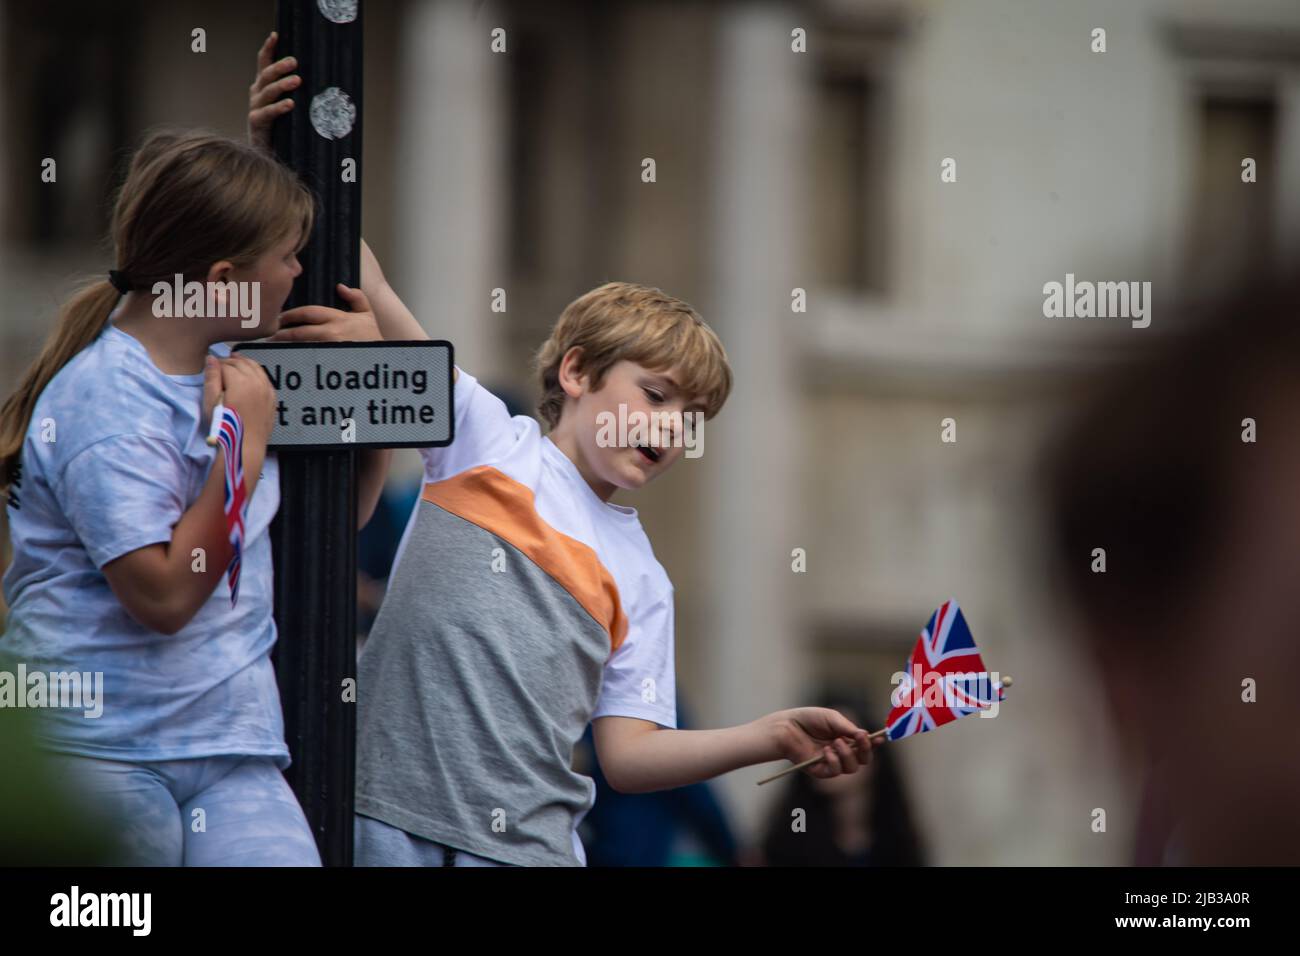 London, UK. 02nd June, 2022. People enjoy the Platinum Jubilee in Trafalgar square during The Platinum Jubilee of Elizabeth II being celebrated. Photographed by Credit: Michael Tubi/Alamy Live News Stock Photo